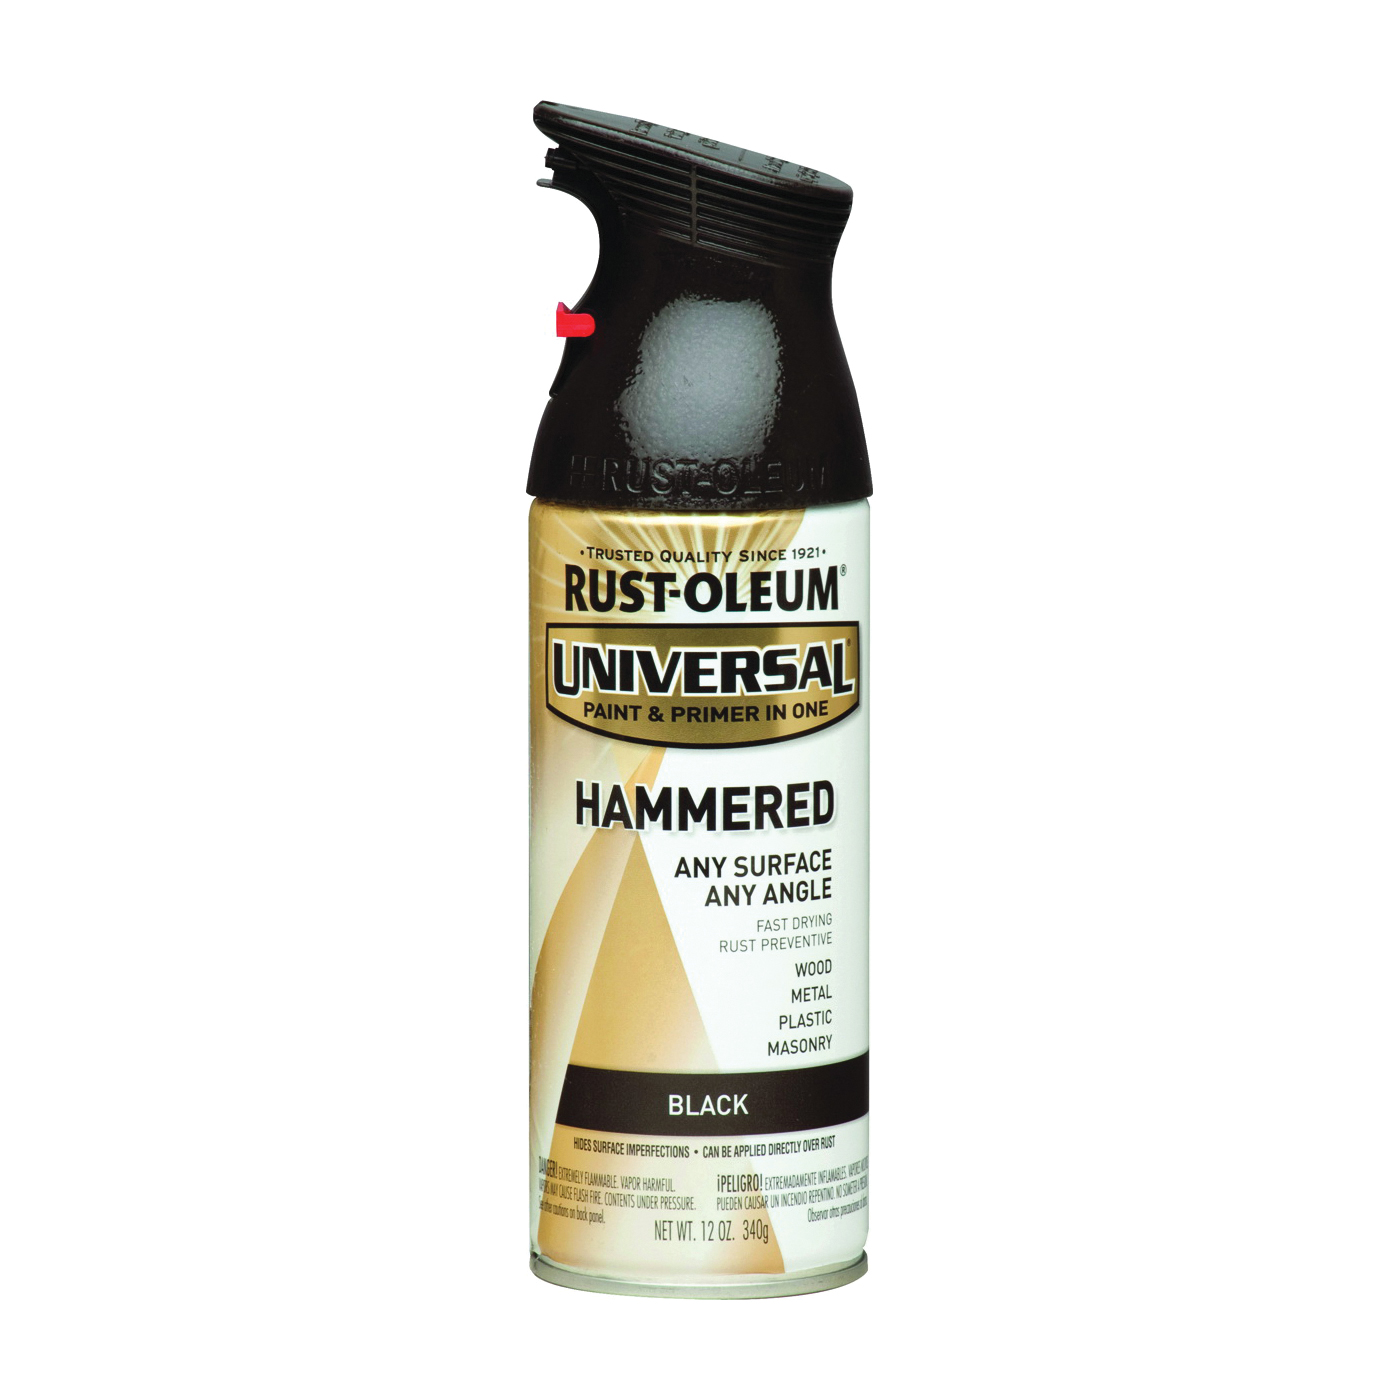 Rust-Oleum 245217 Hammered Spray Paint, Hammered, Black, 12 oz, Can - 2